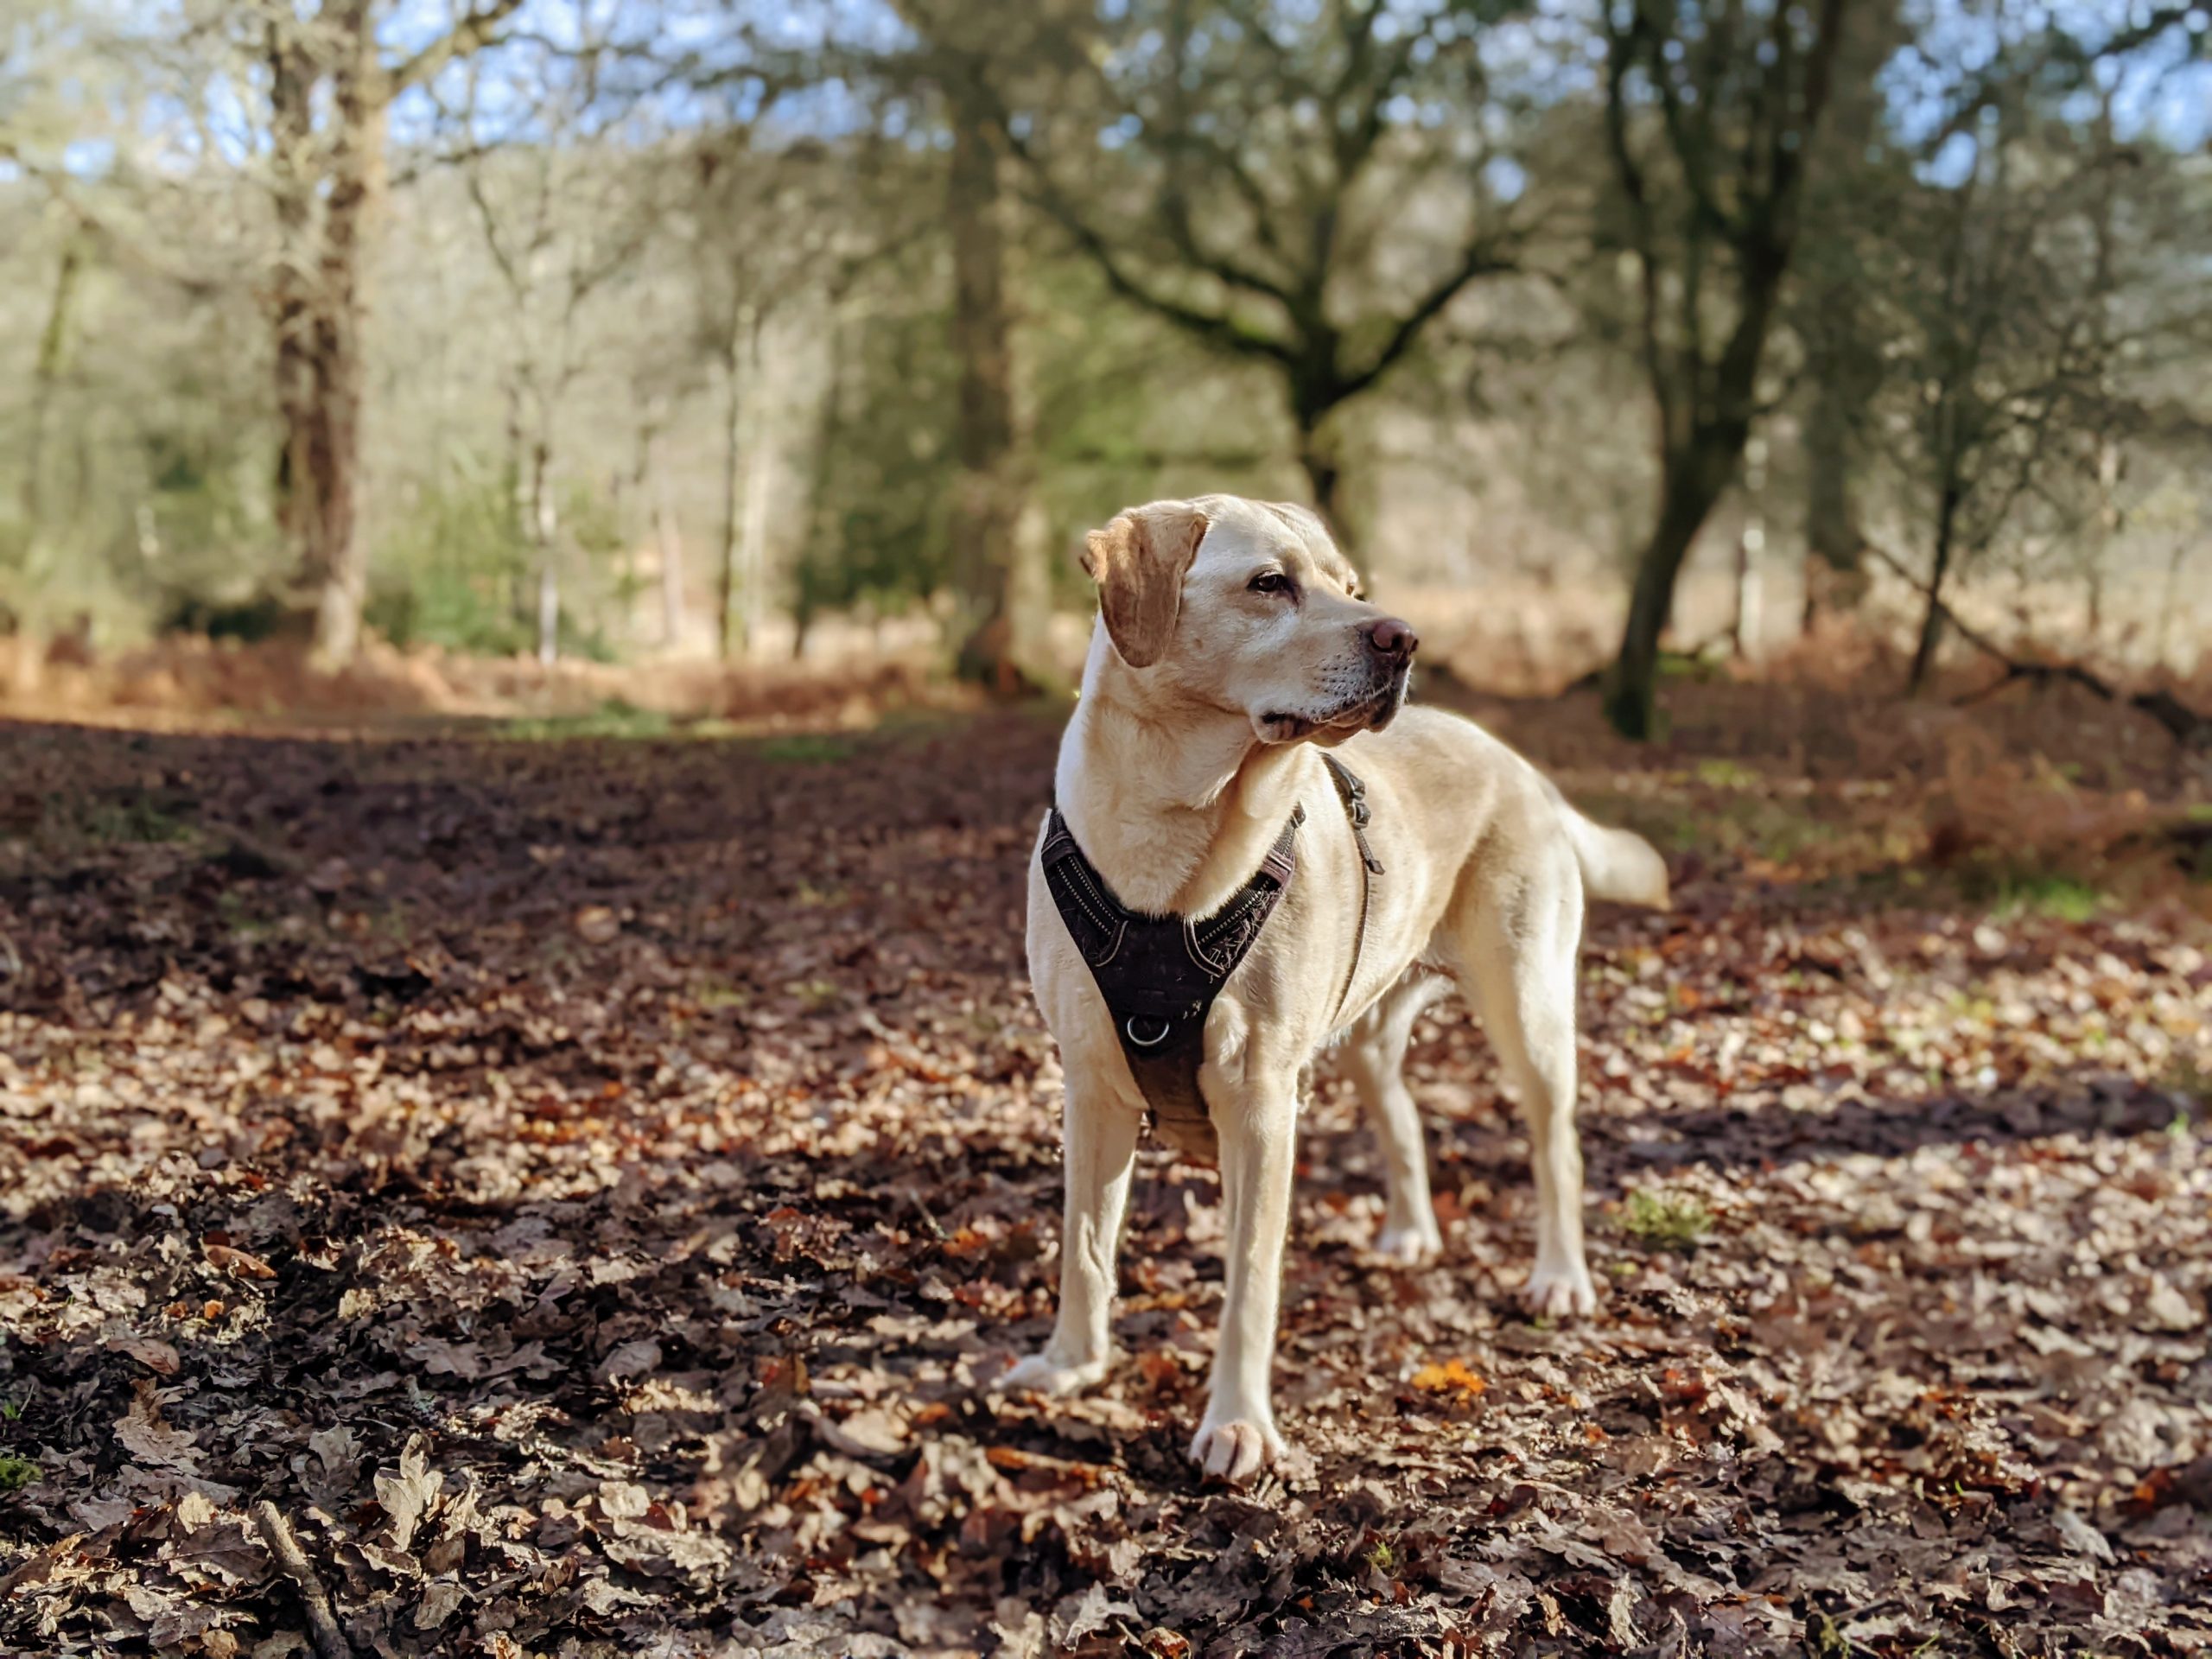 Labrador in forest on fallen leaves